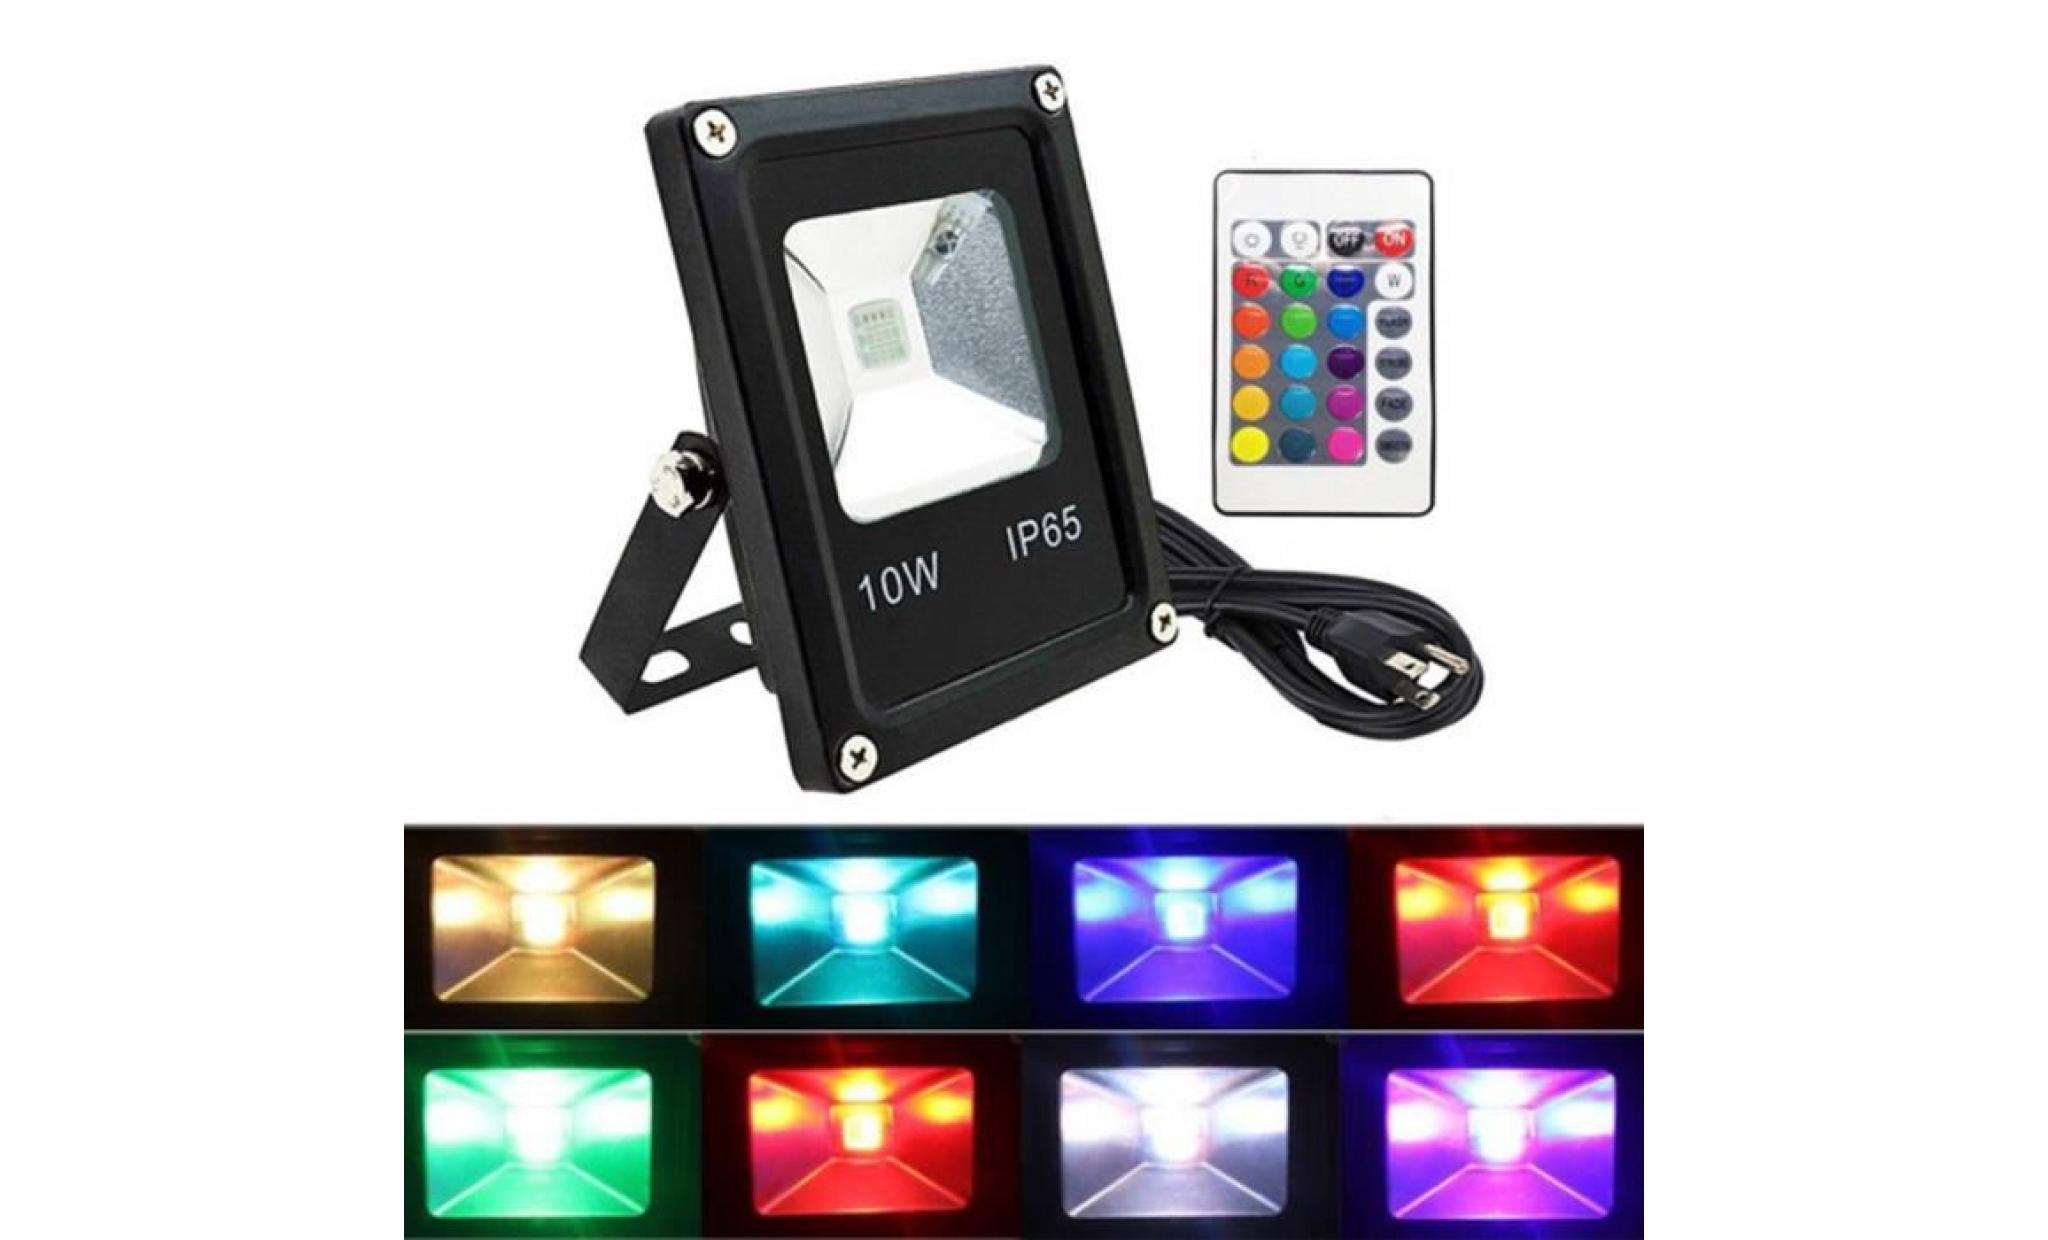 atian 10w rgb led outdoor flood light 16 colors changing waterproof floodlight wall wash lamps for patio garden driveway pond